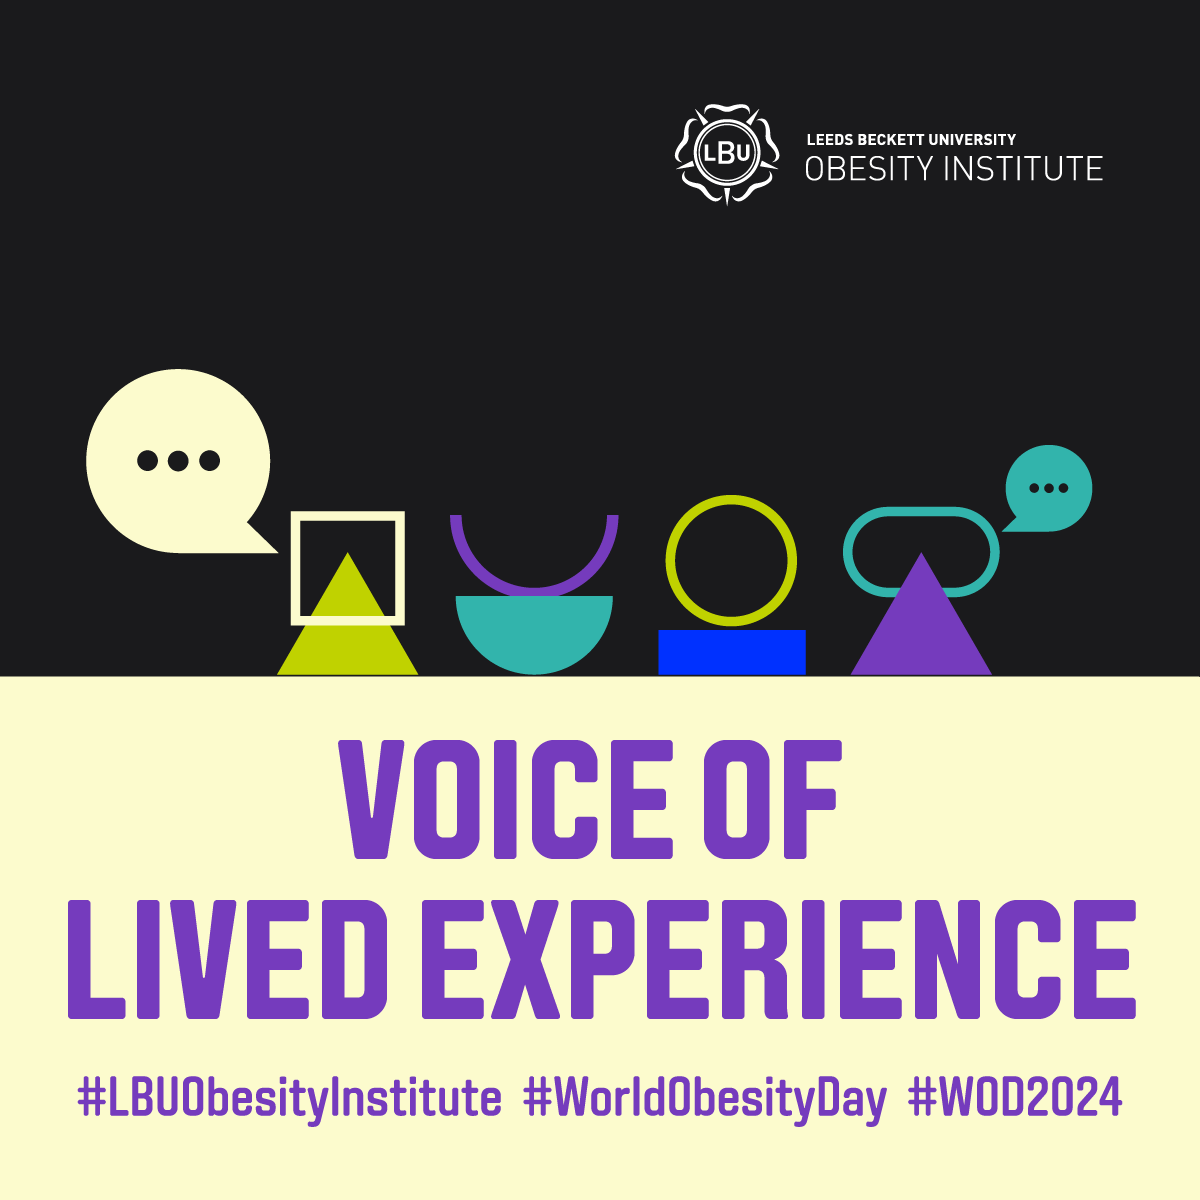 We’re pleased to share the recording of our “Voice of Lived Experience” #WOD2024 event to watch now: bit.ly/VoiceOfLivedExp #WorldObesityDay #LBUObesityInstitute